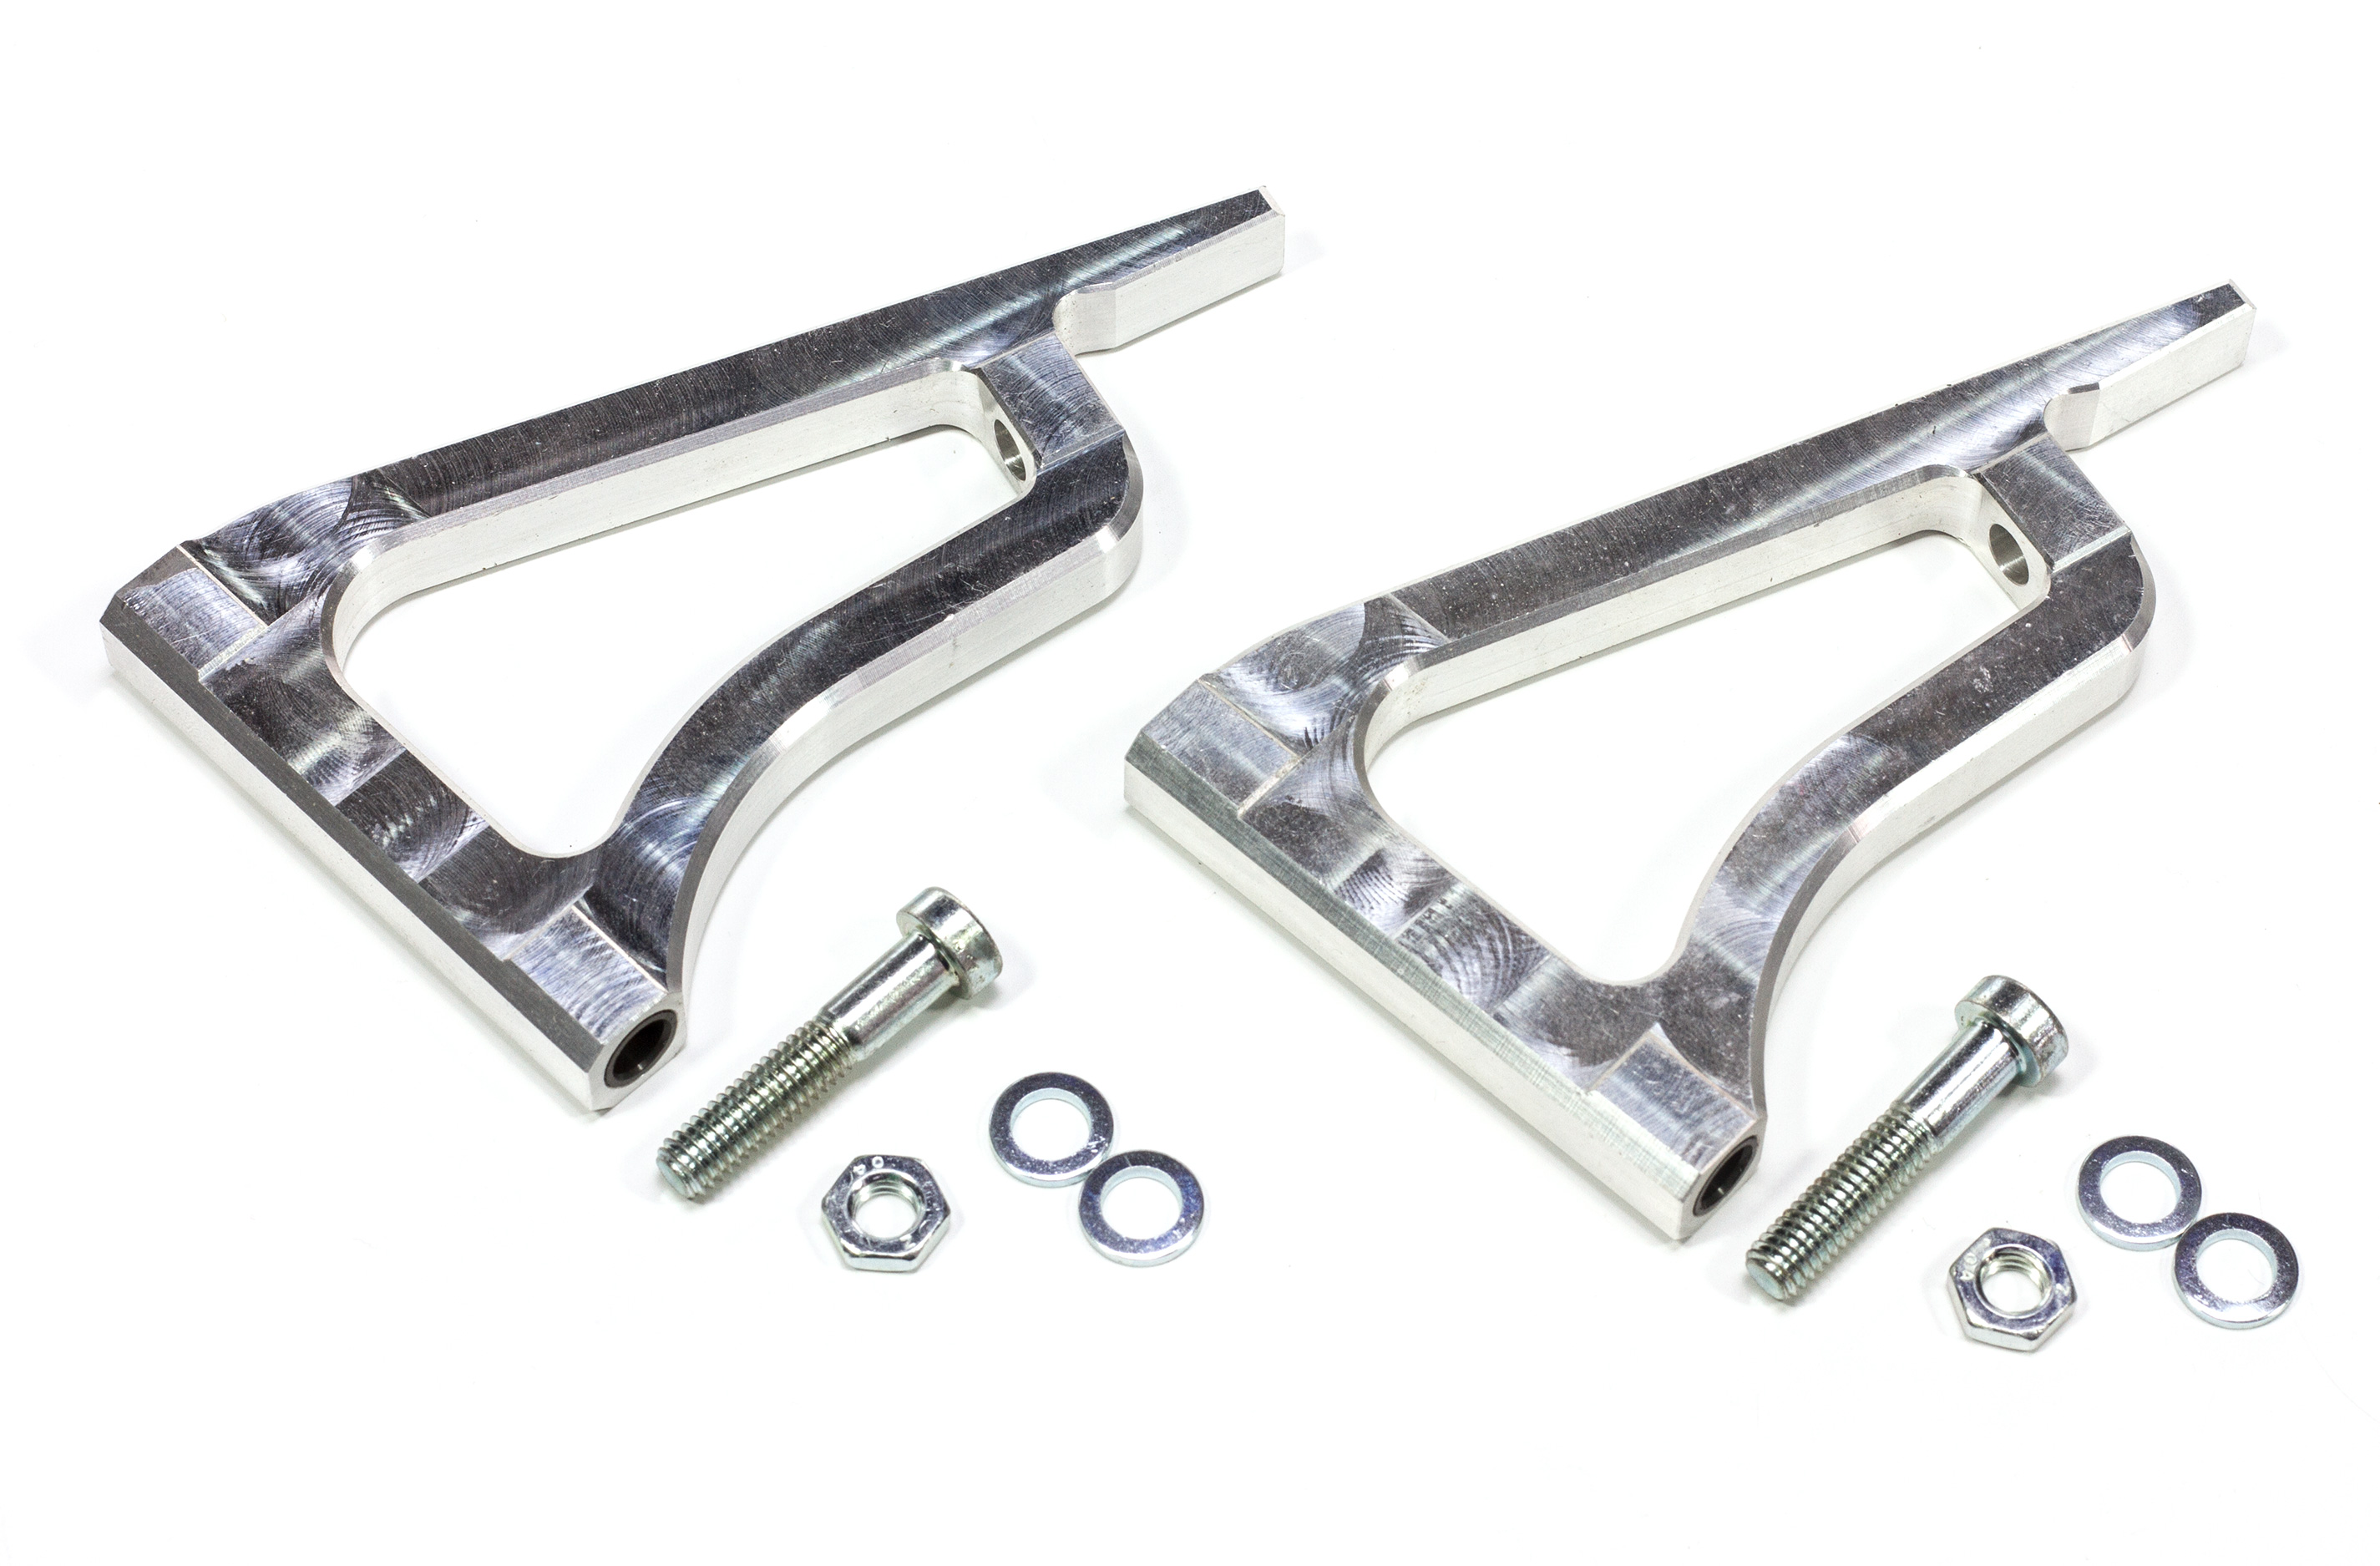 y0311 Elcon Aluminum front upper a-arms for FG Leopard 1